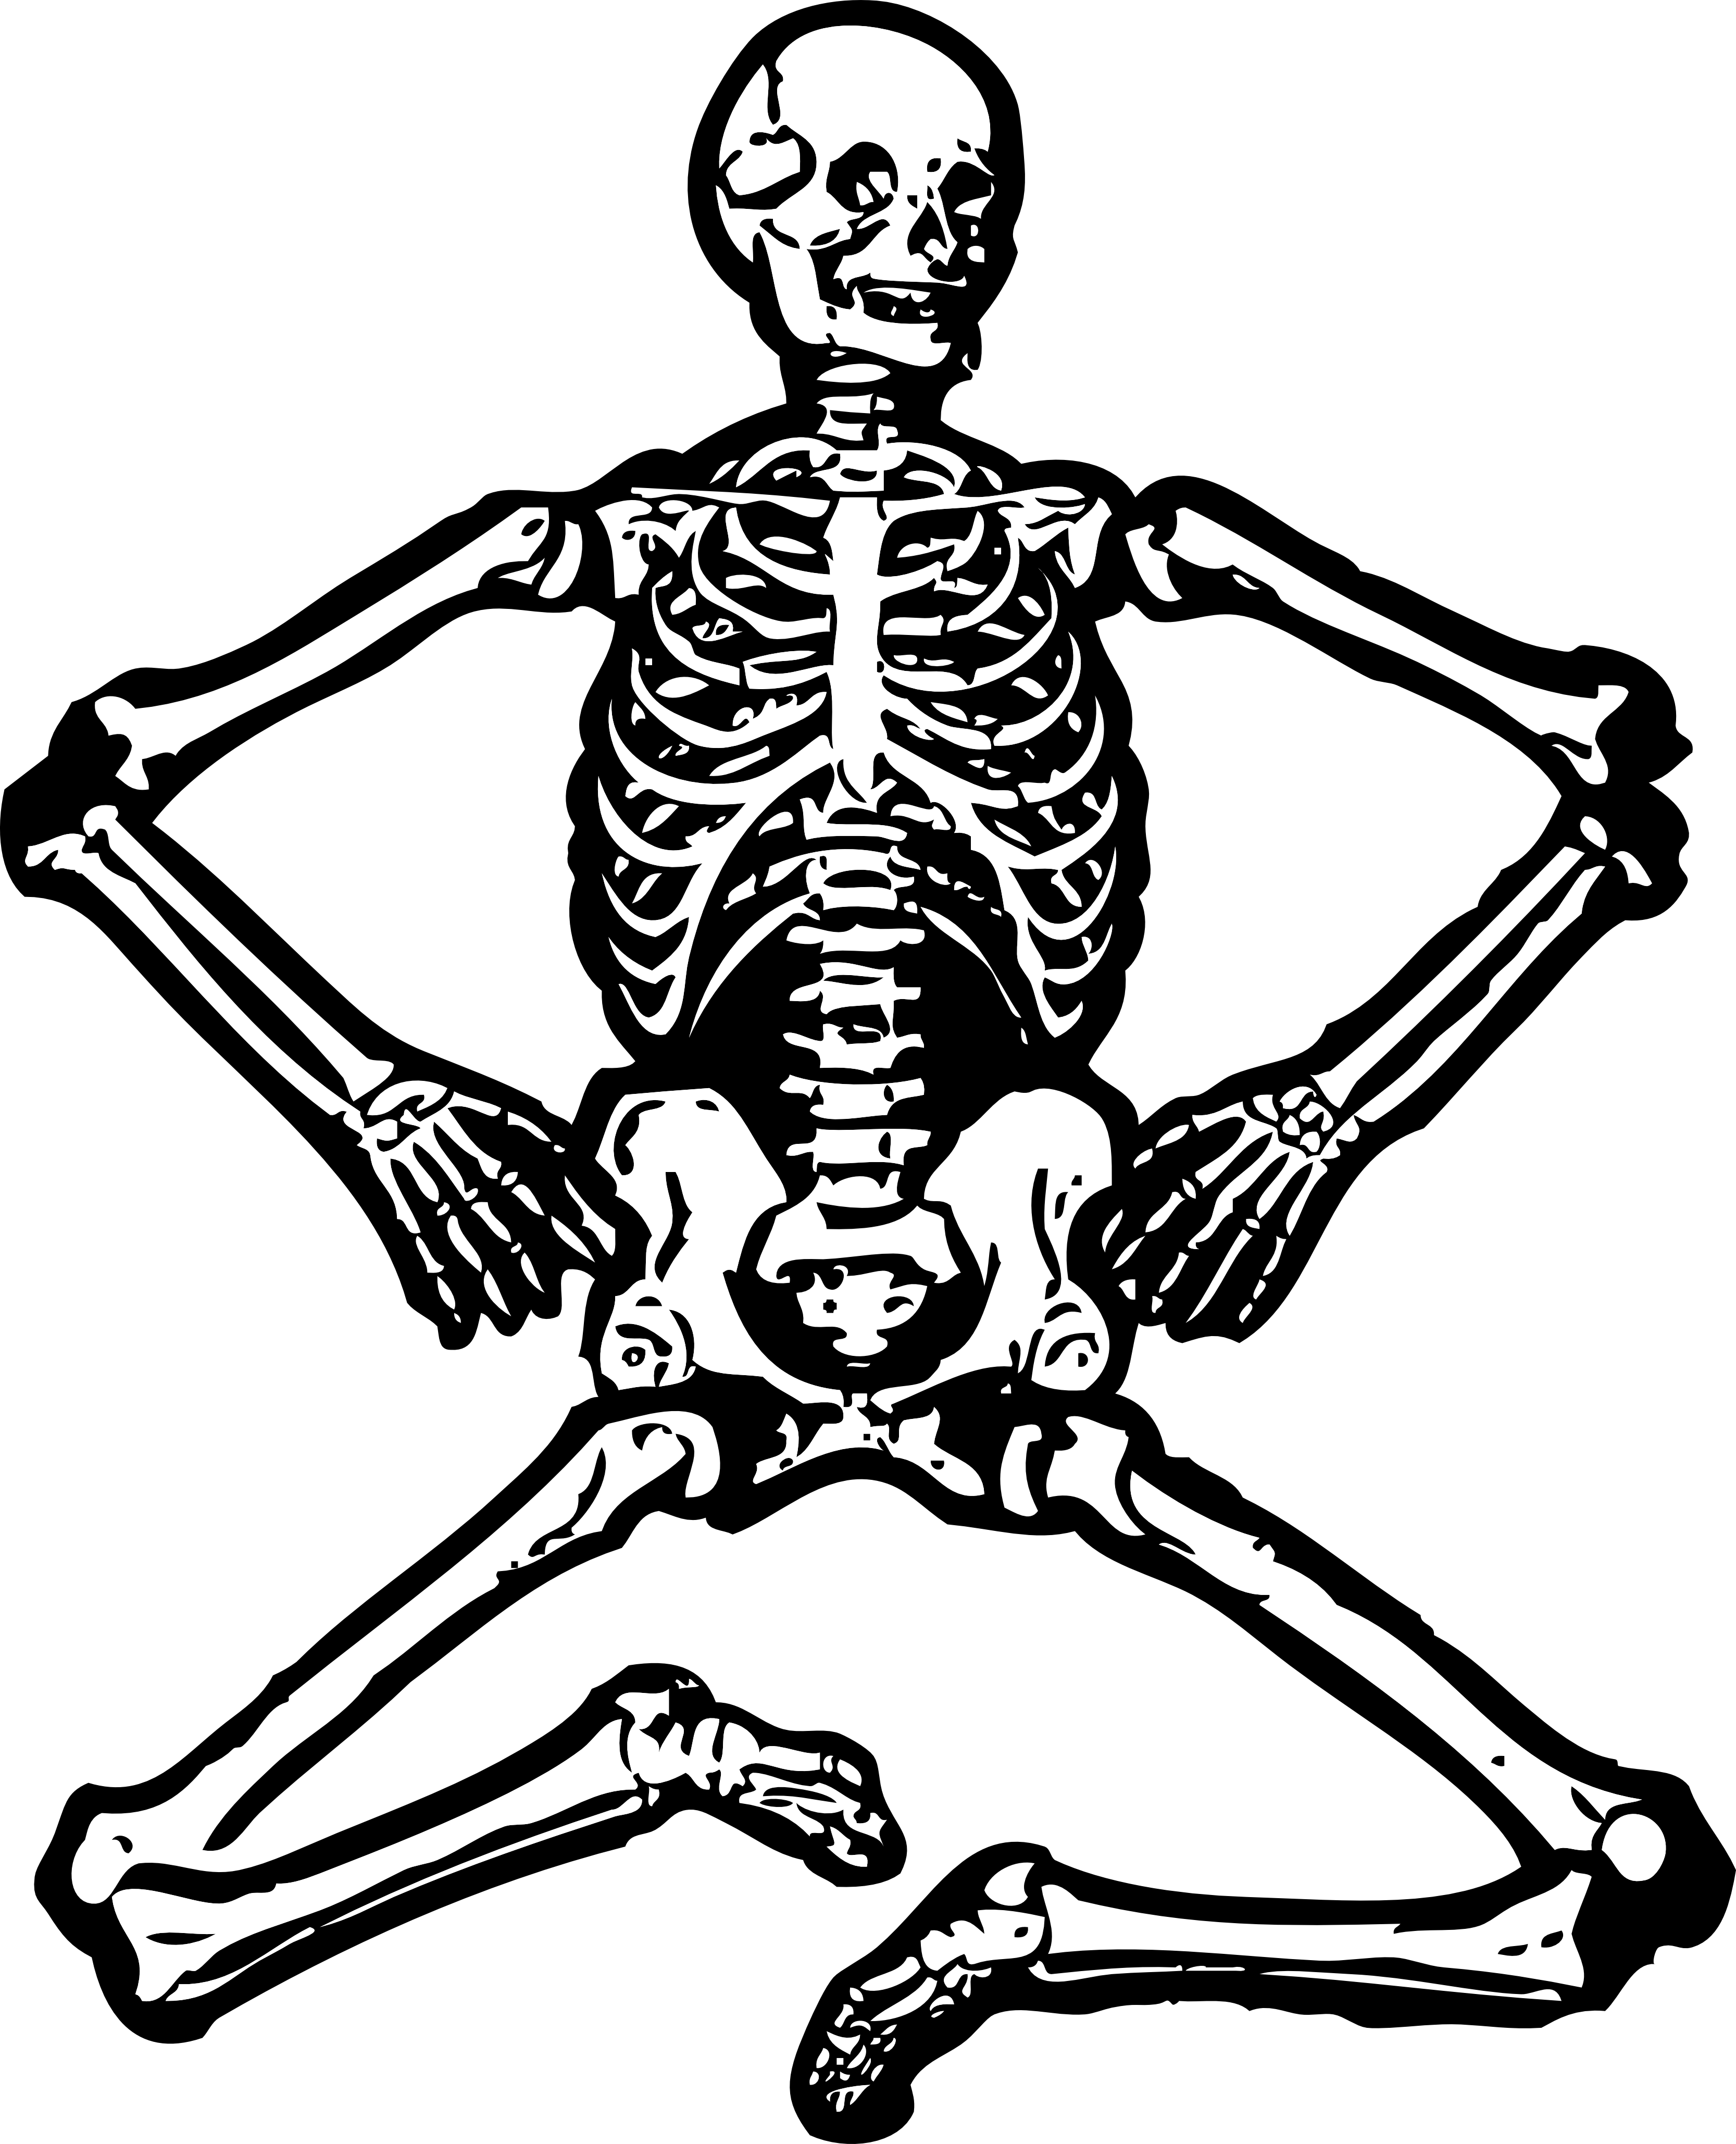 A Skeleton In A Pose